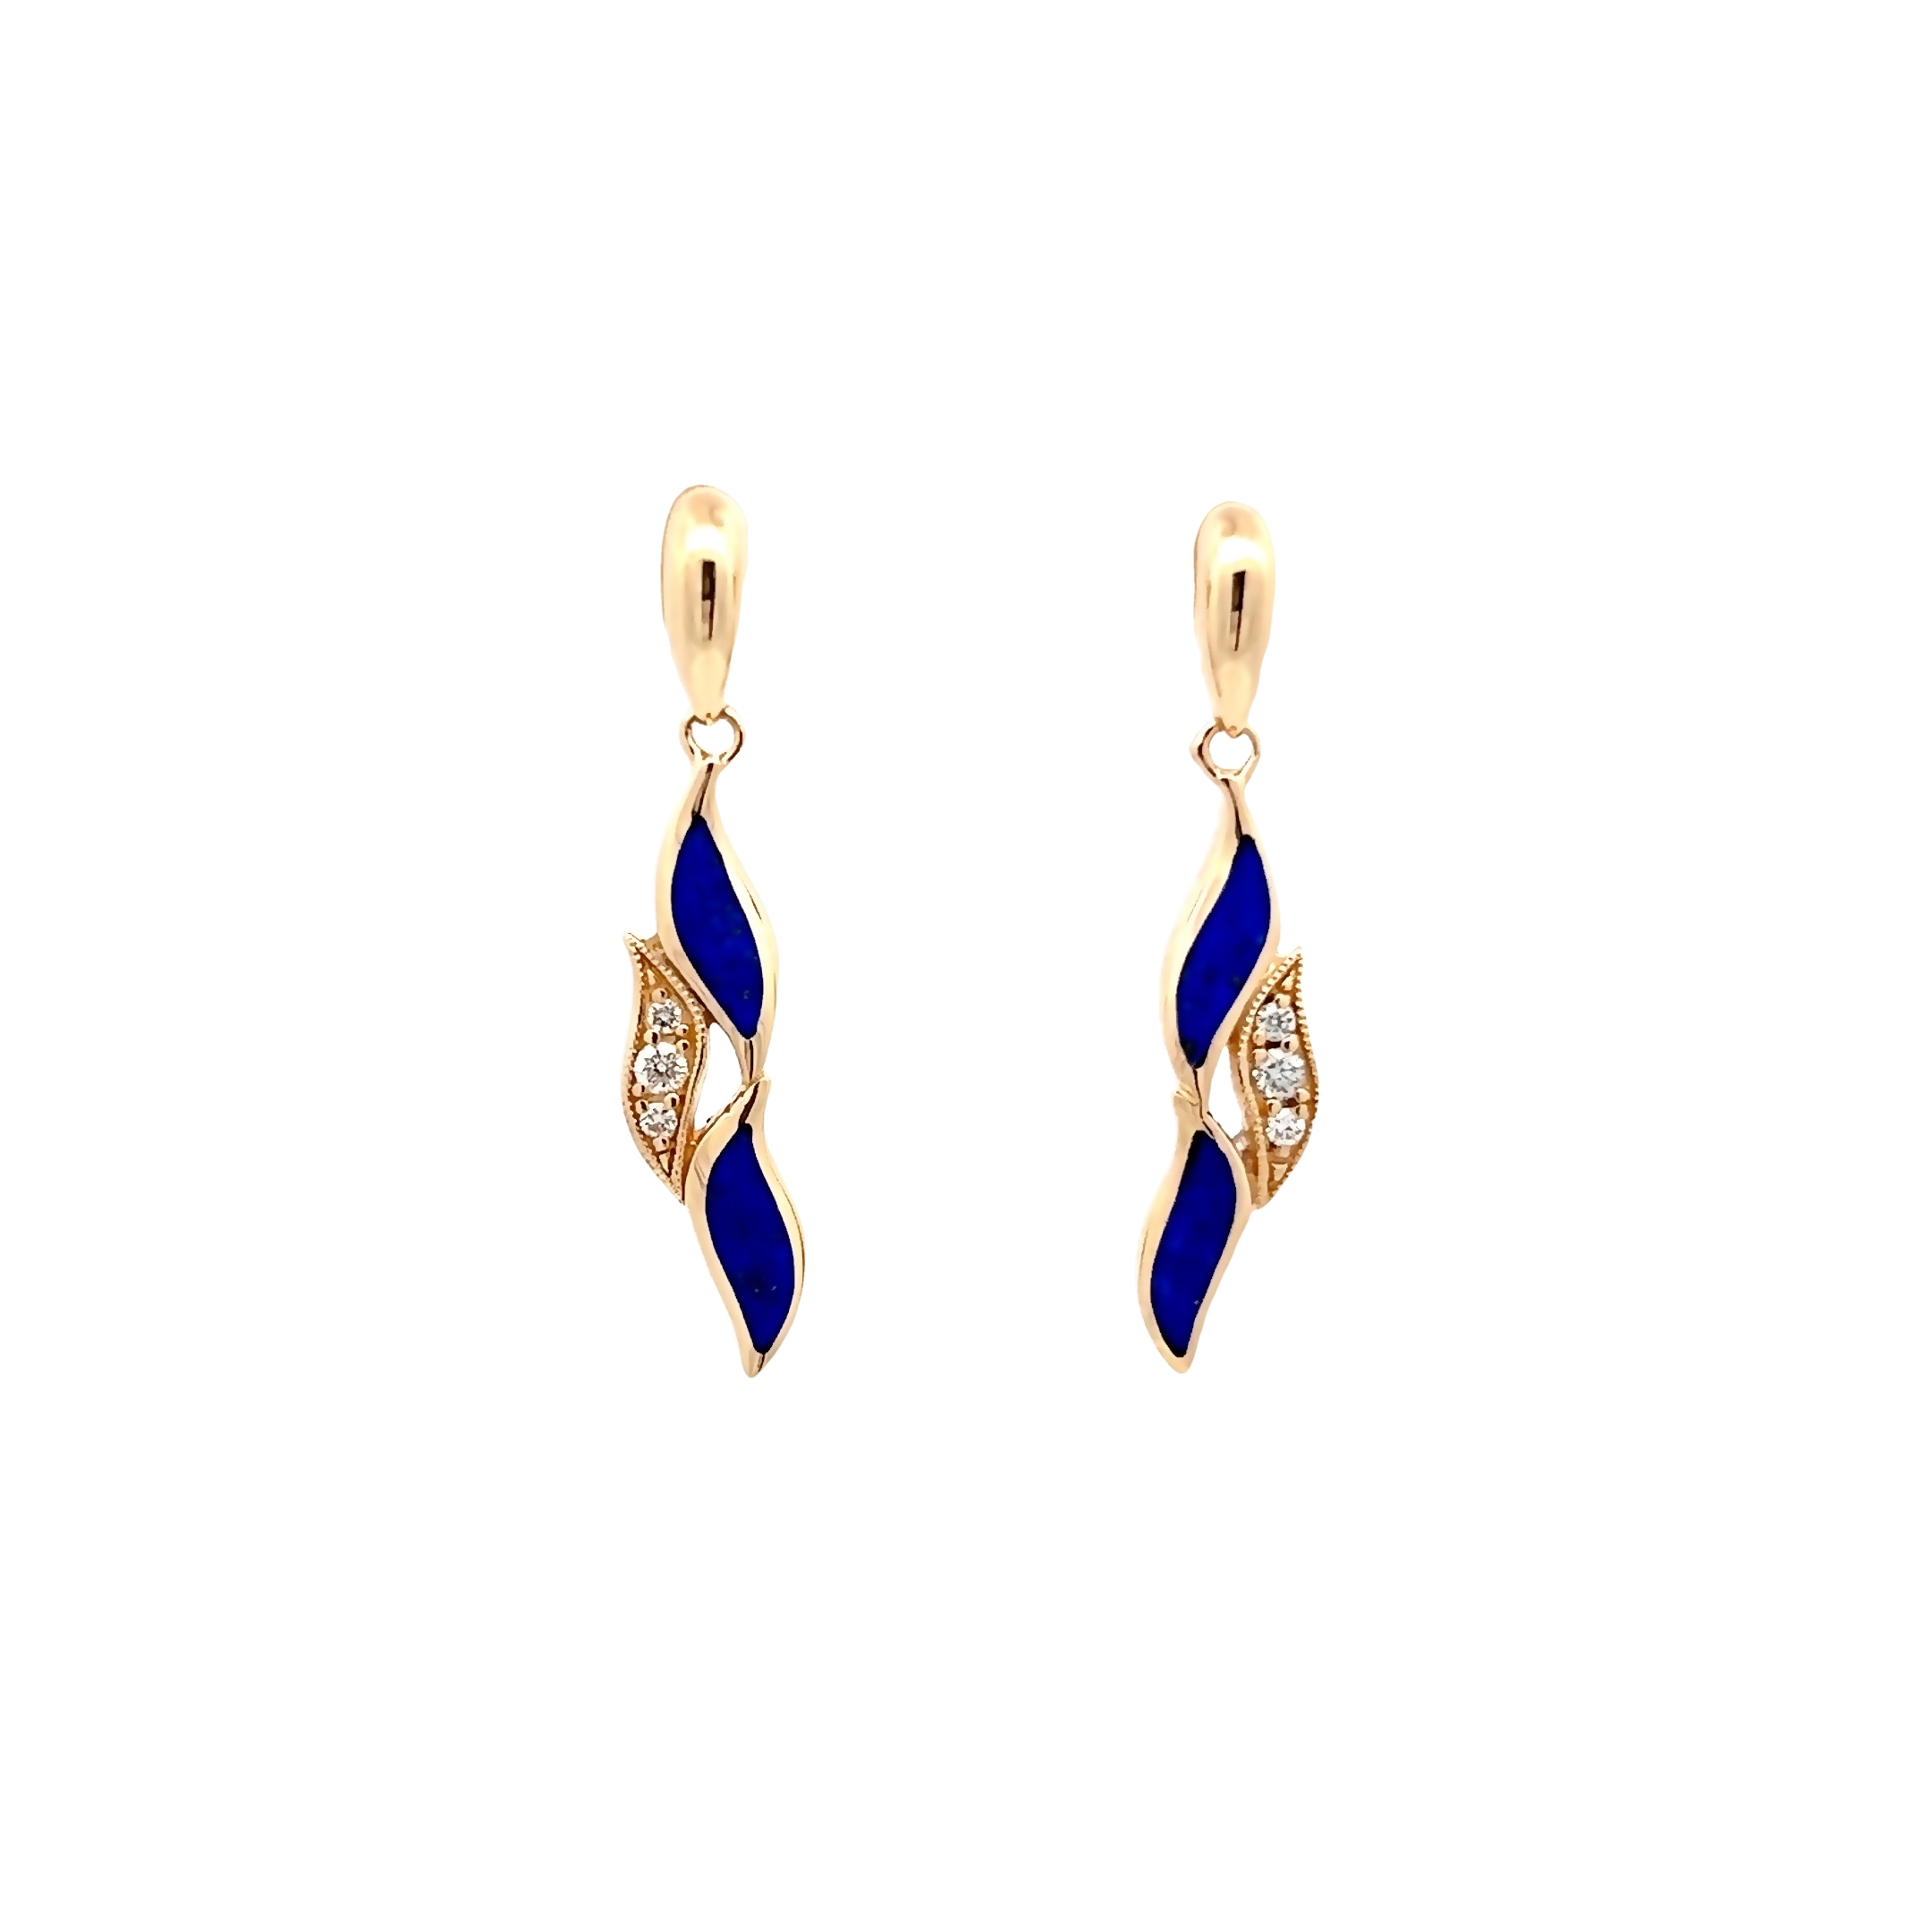 14 Karat yellow gold earrings with 6=0.07 total weight round brilliant G VS Diamonds and Lapis Lazuli inlay.